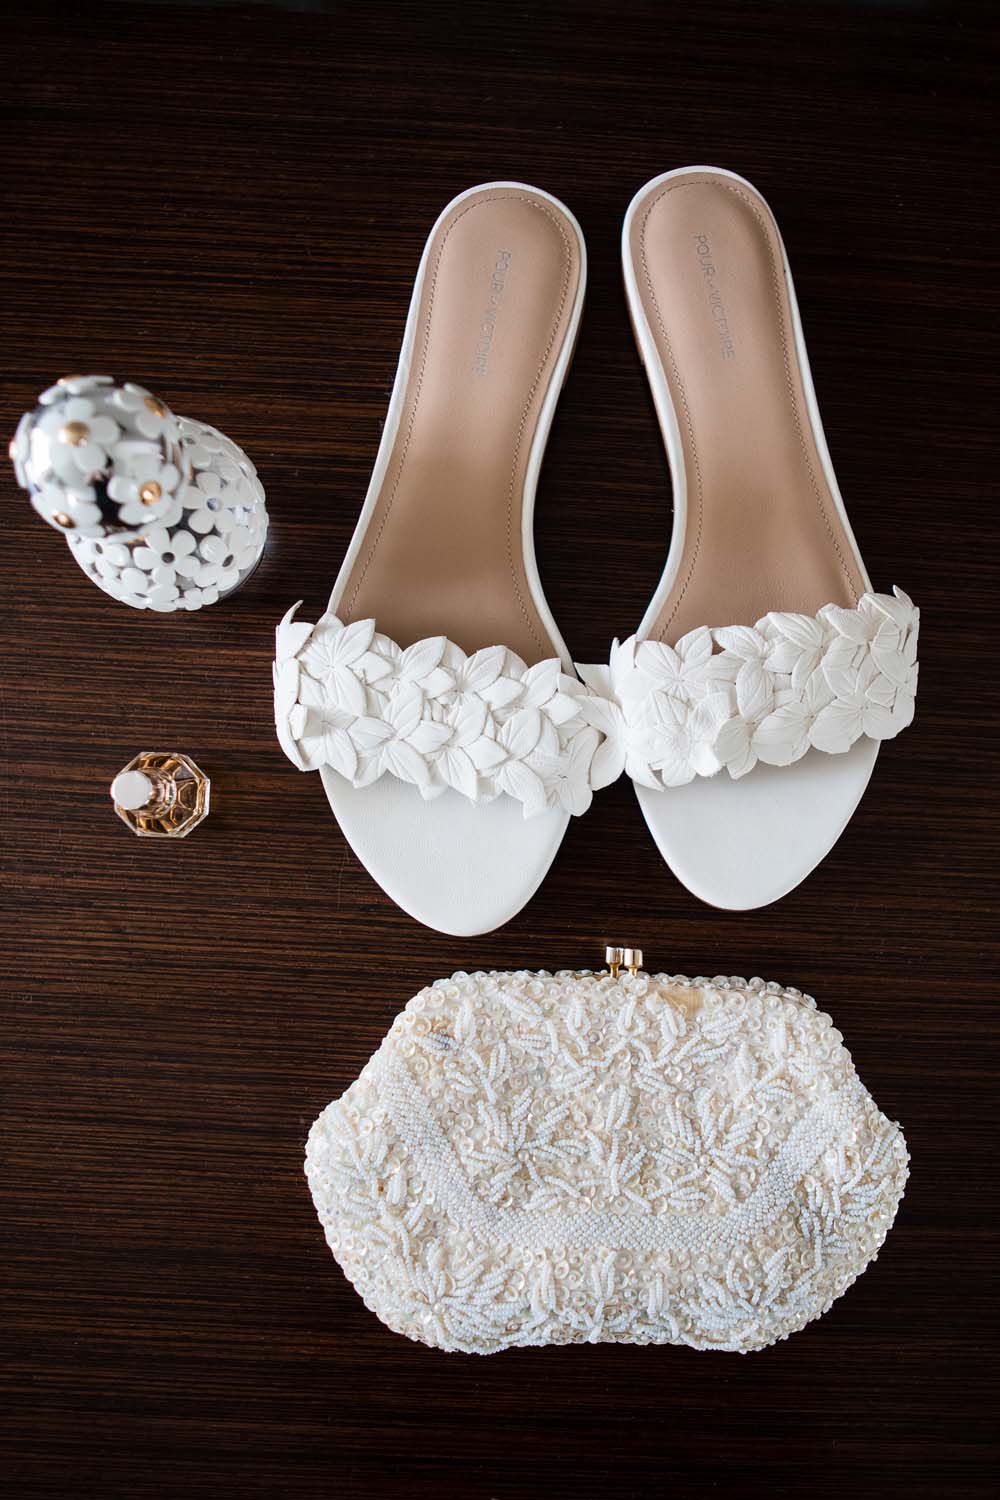 A-Modern-Lakeside-Wedding-In-Burnaby-British-Columbia-Shoes and Clutch